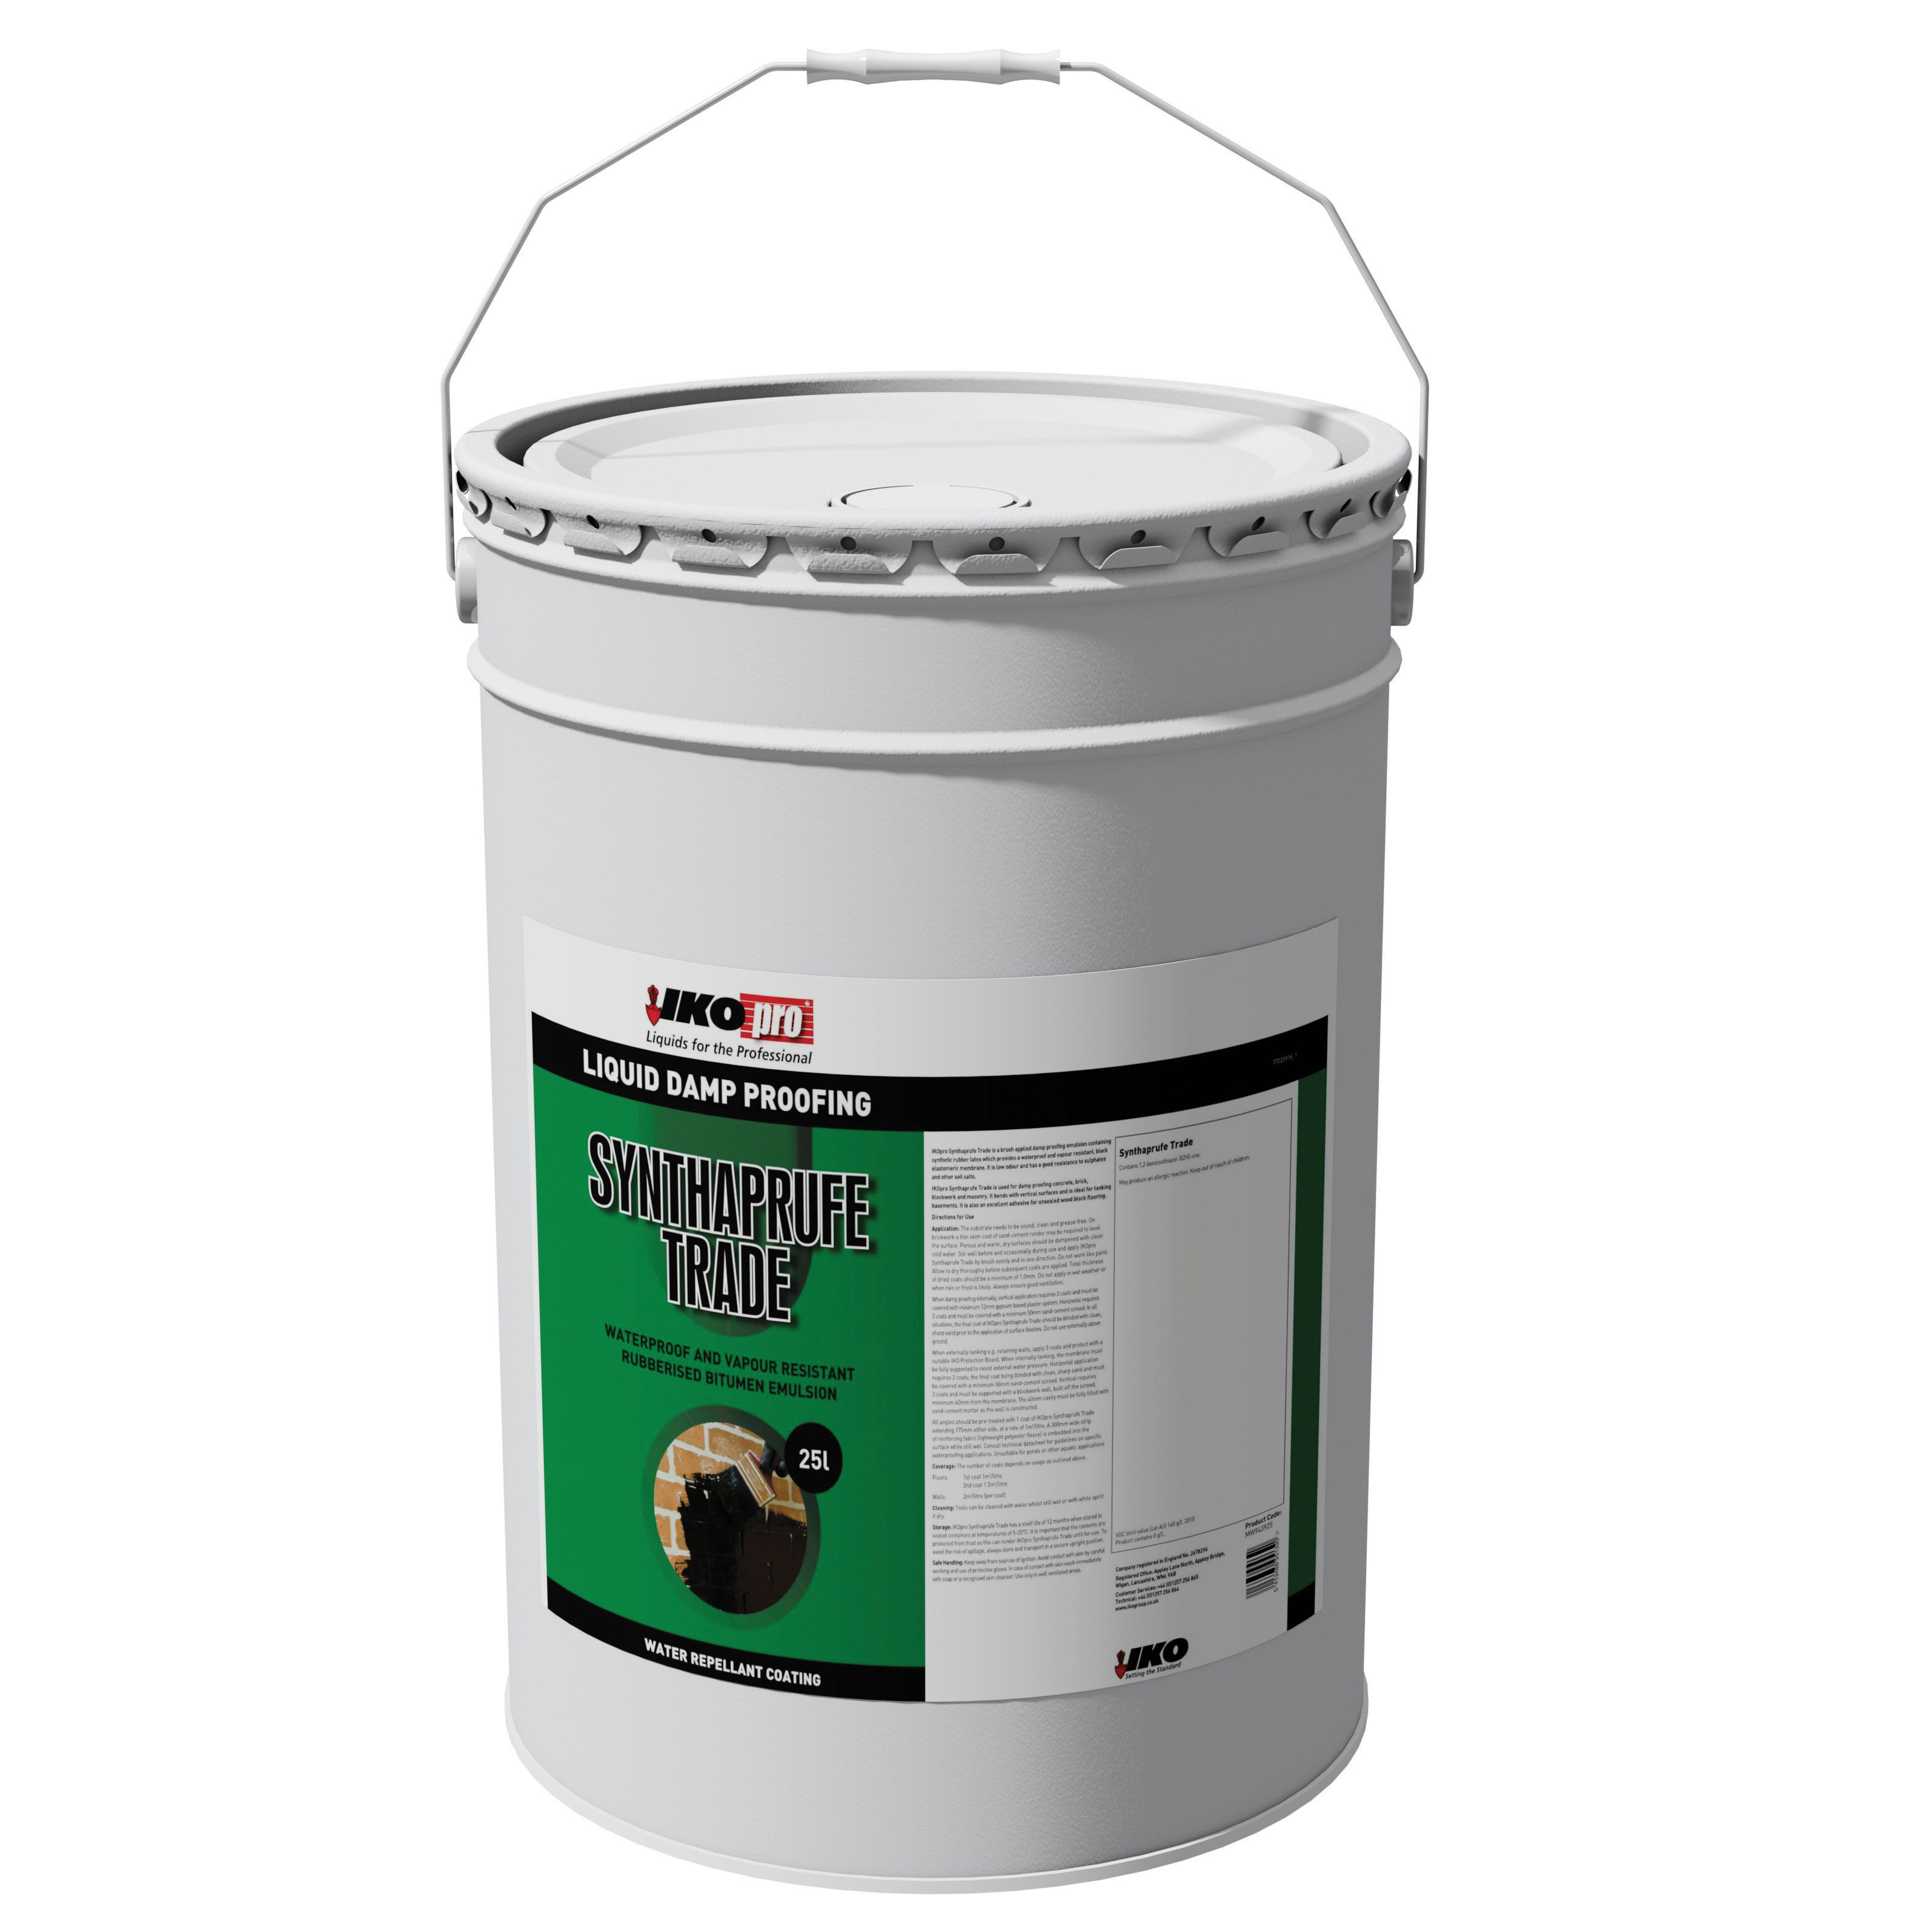 Image of Ikopro Synthaprufe Trade Damp Proofing Liquid - 25L